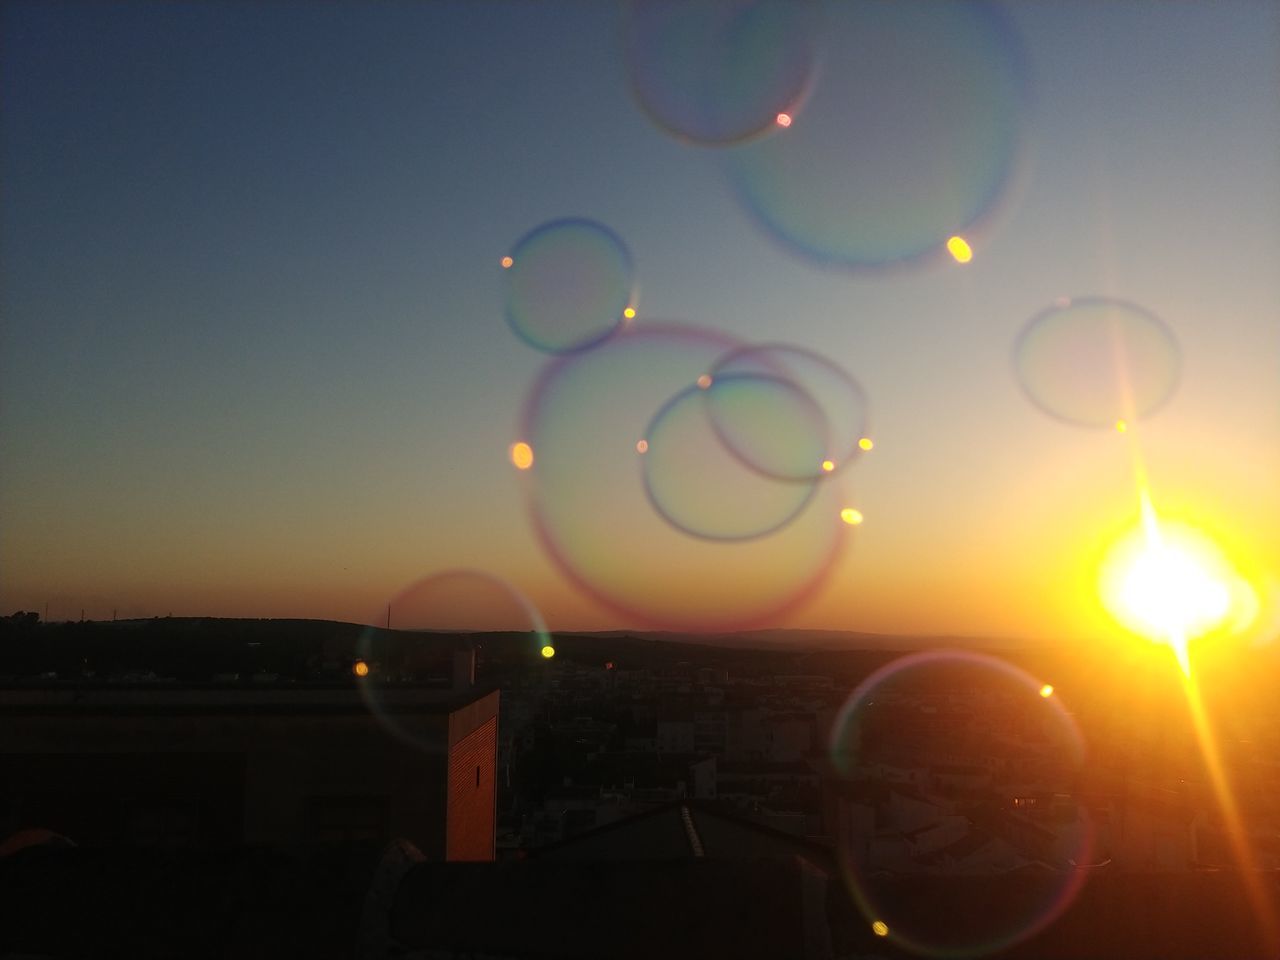 sky, light, bubble, mid-air, nature, sunset, flying, sunlight, no people, cloud, reflection, lens flare, astronomical object, liquid bubble, outdoors, lighting, multi colored, fragility, yellow, soap sud, sun, beauty in nature, transparent, bubble wand, shape, circle, tranquility, balloon, evening, geometric shape, clear sky, environment, architecture, sphere, orange color